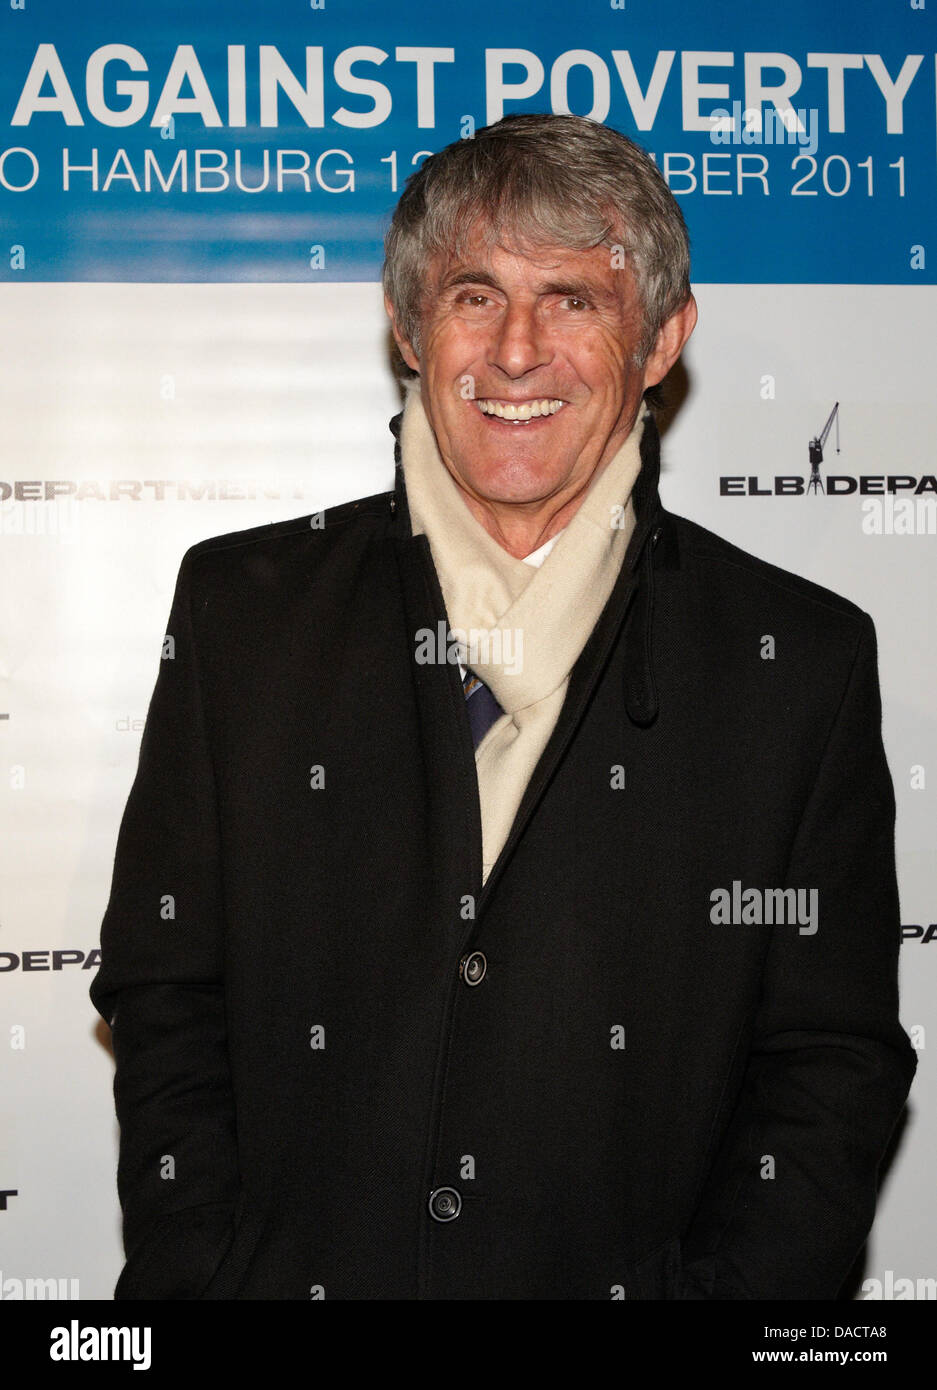 Bora Milutinovic arrives to the after match dinner at Weisses Haus restaurant after the 'Match Against Poverty' match in Hamburg, Germany, 13 December 2011. A selection of world soccer players including Ronaldo and Zinédine Zidane played Hamburg SV with a few additional all-stars to collect donations for the United Nations Development Programme (UNDP) for humanitary help to the Hor Stock Photo